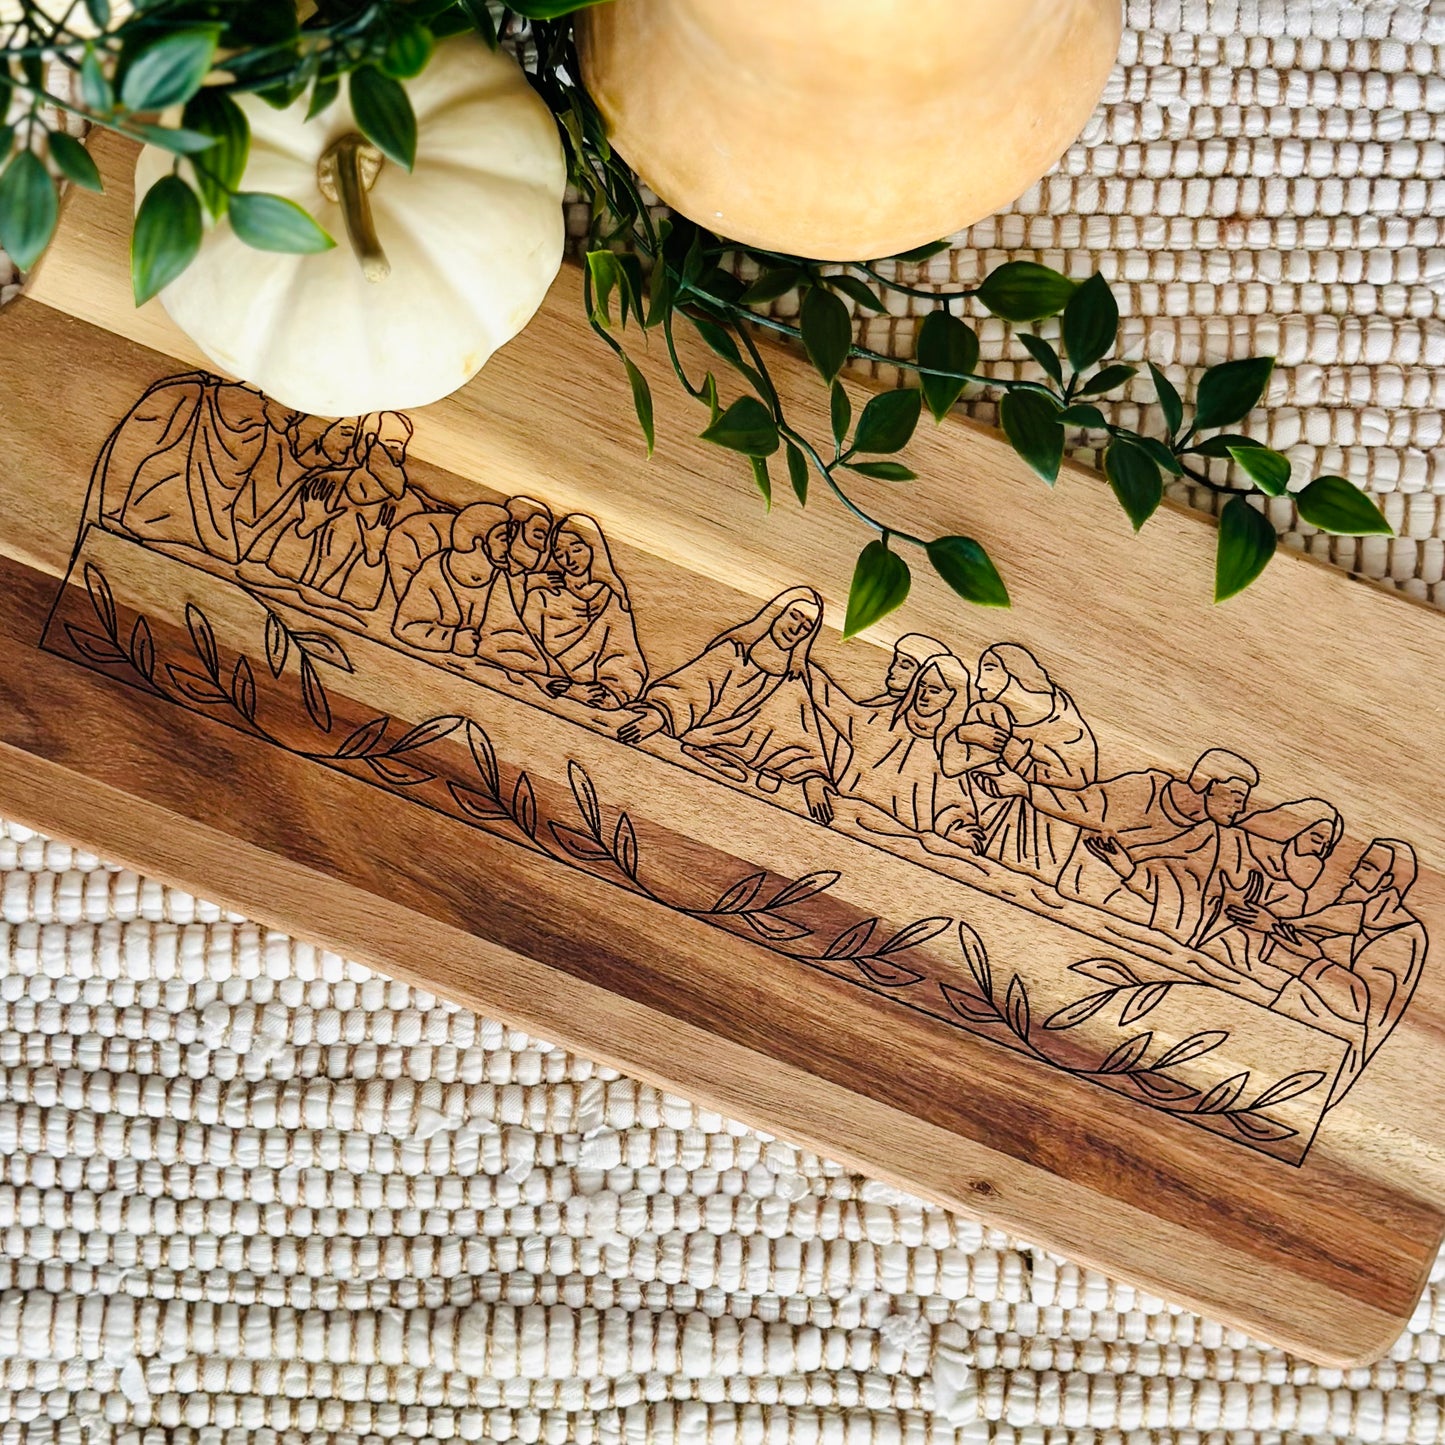 The Last Supper Serving Board